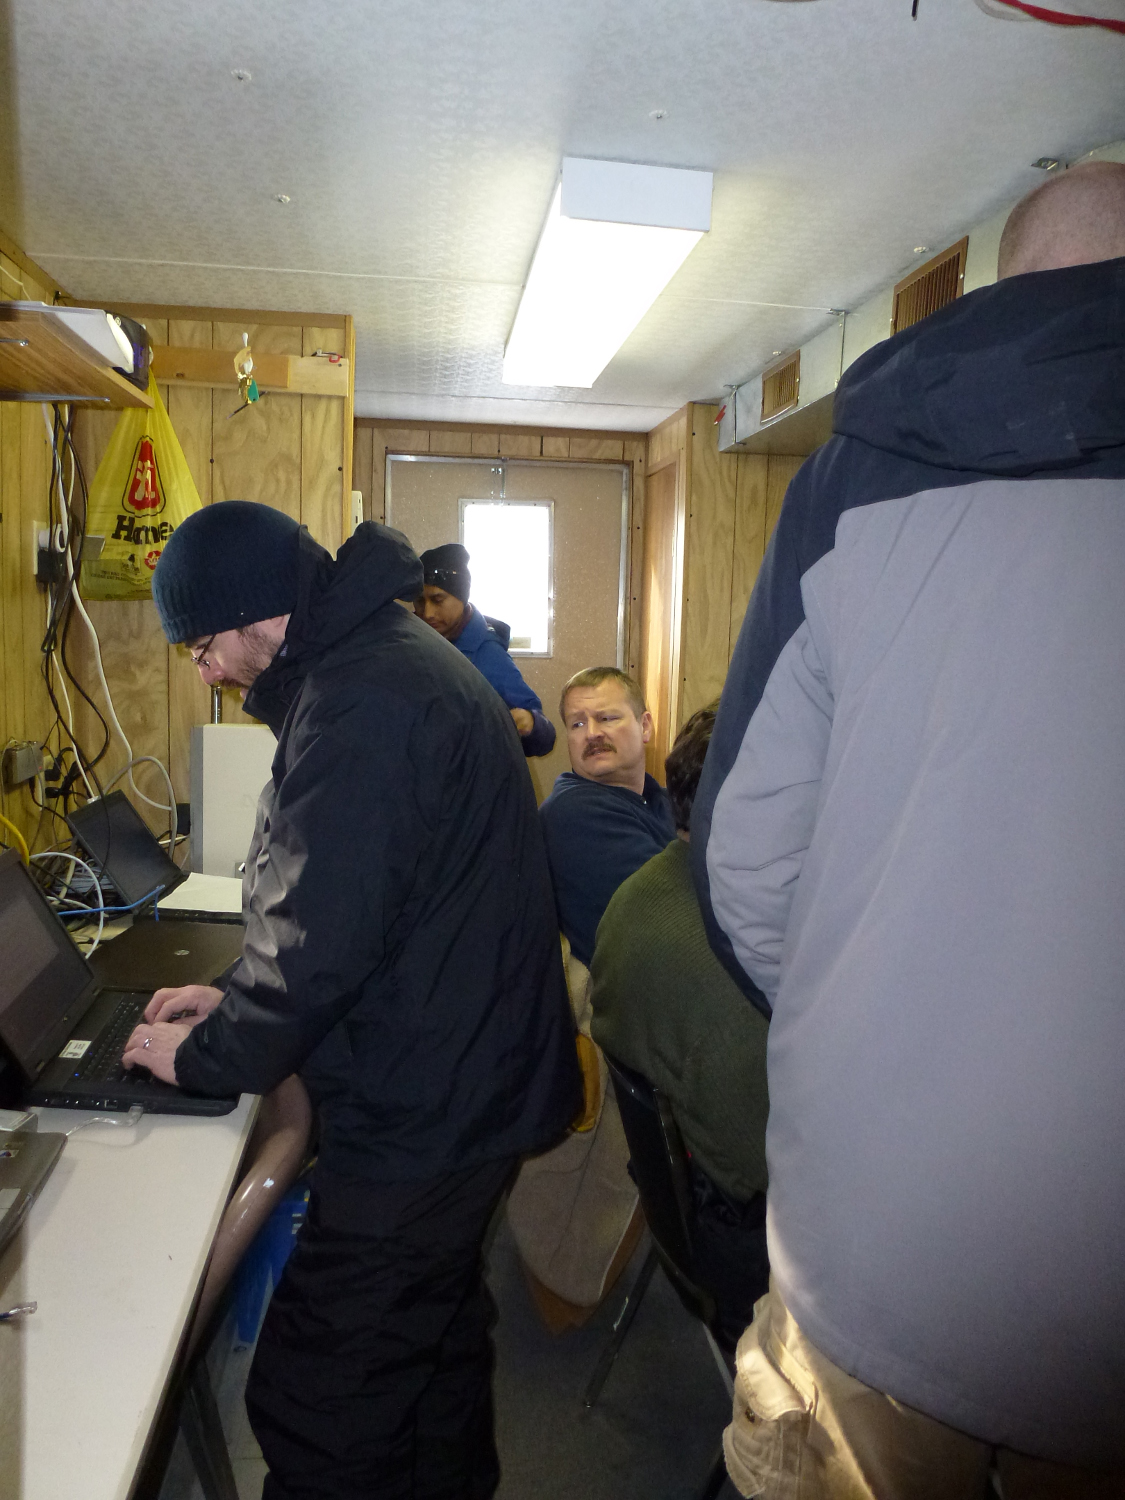 GCPEx scientists inside the cramped operations trailer